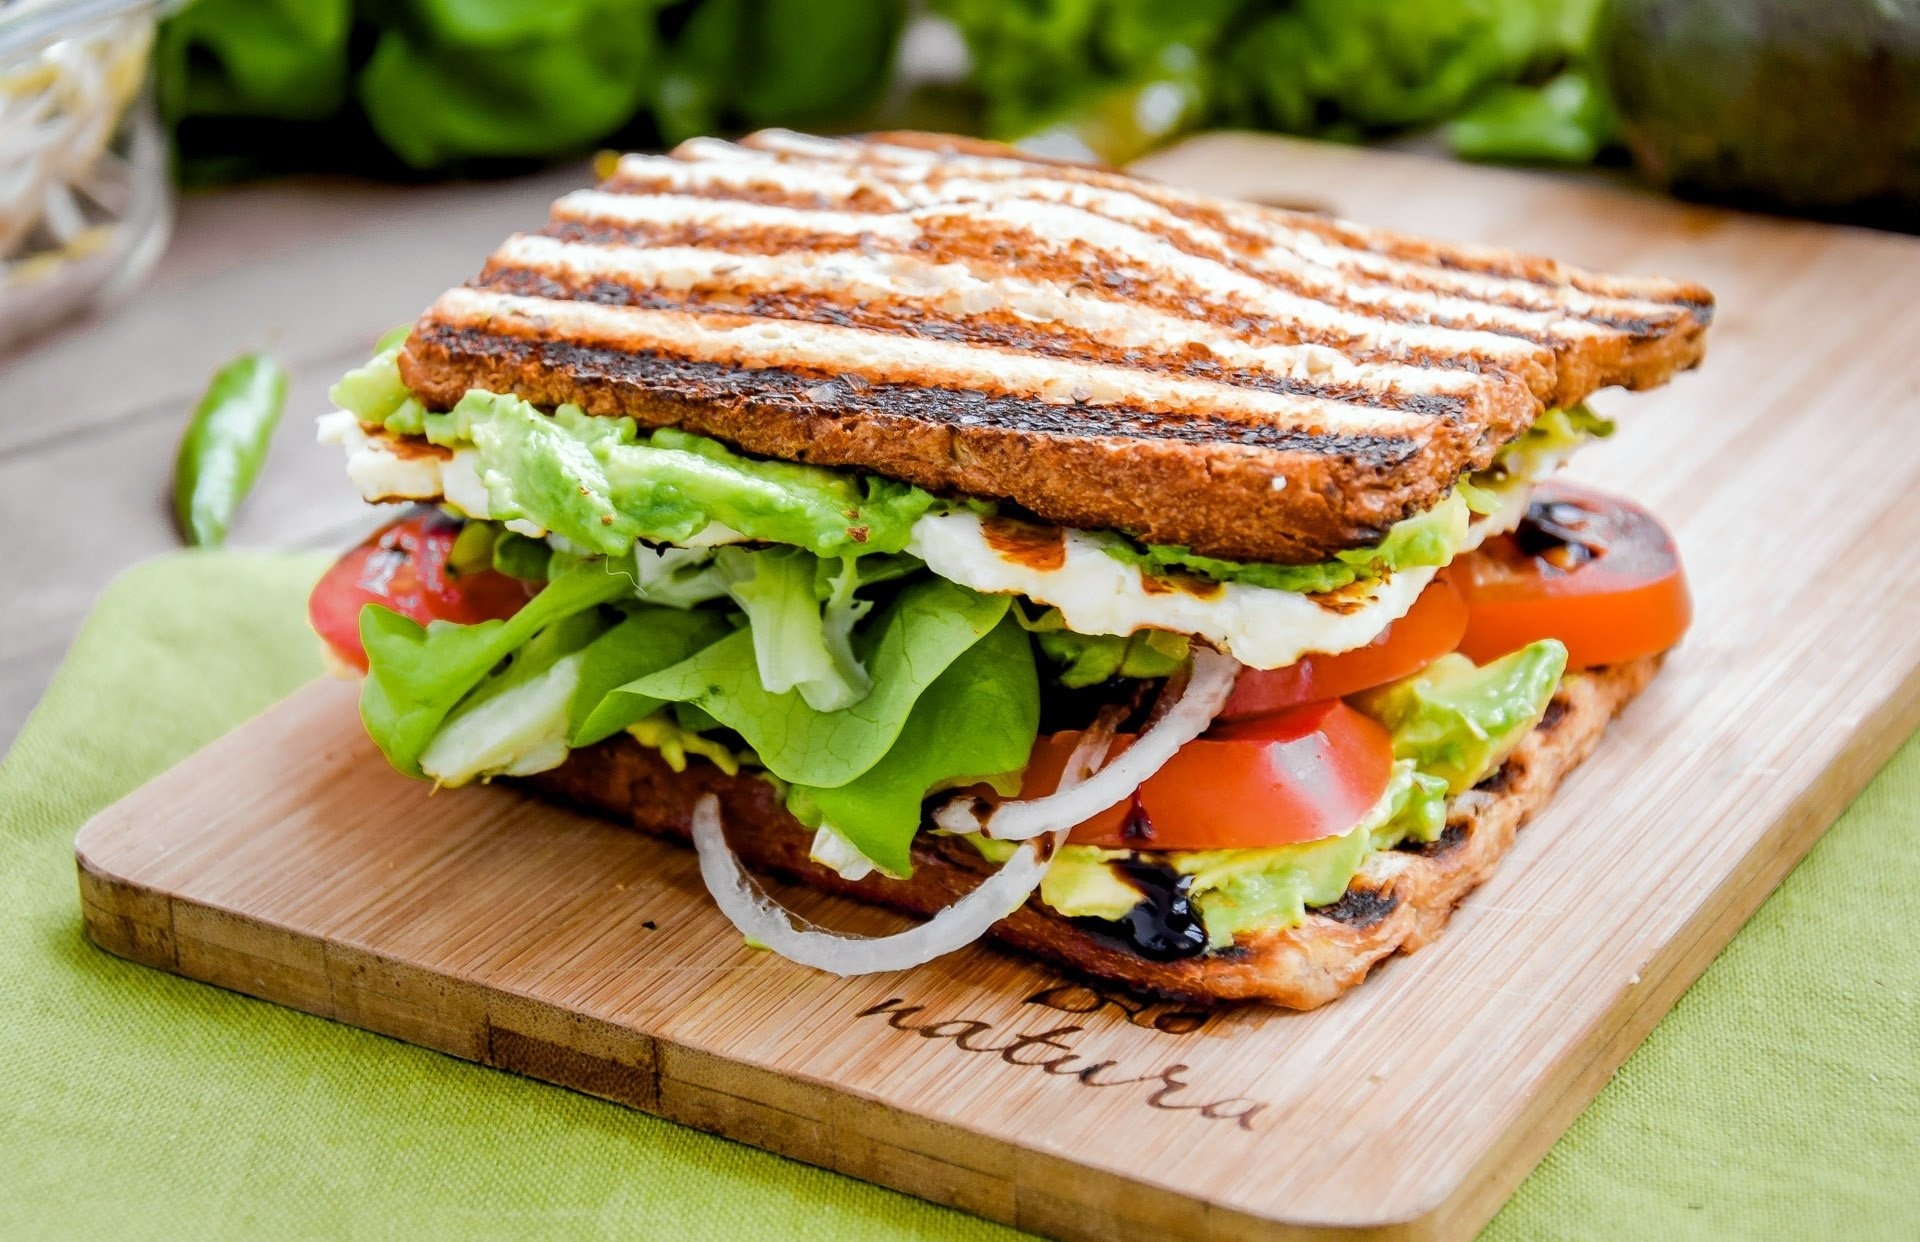 Sandwich: Toasted or grilled to add a crispy texture and enhance the flavors of the filling. 1920x1250 HD Background.